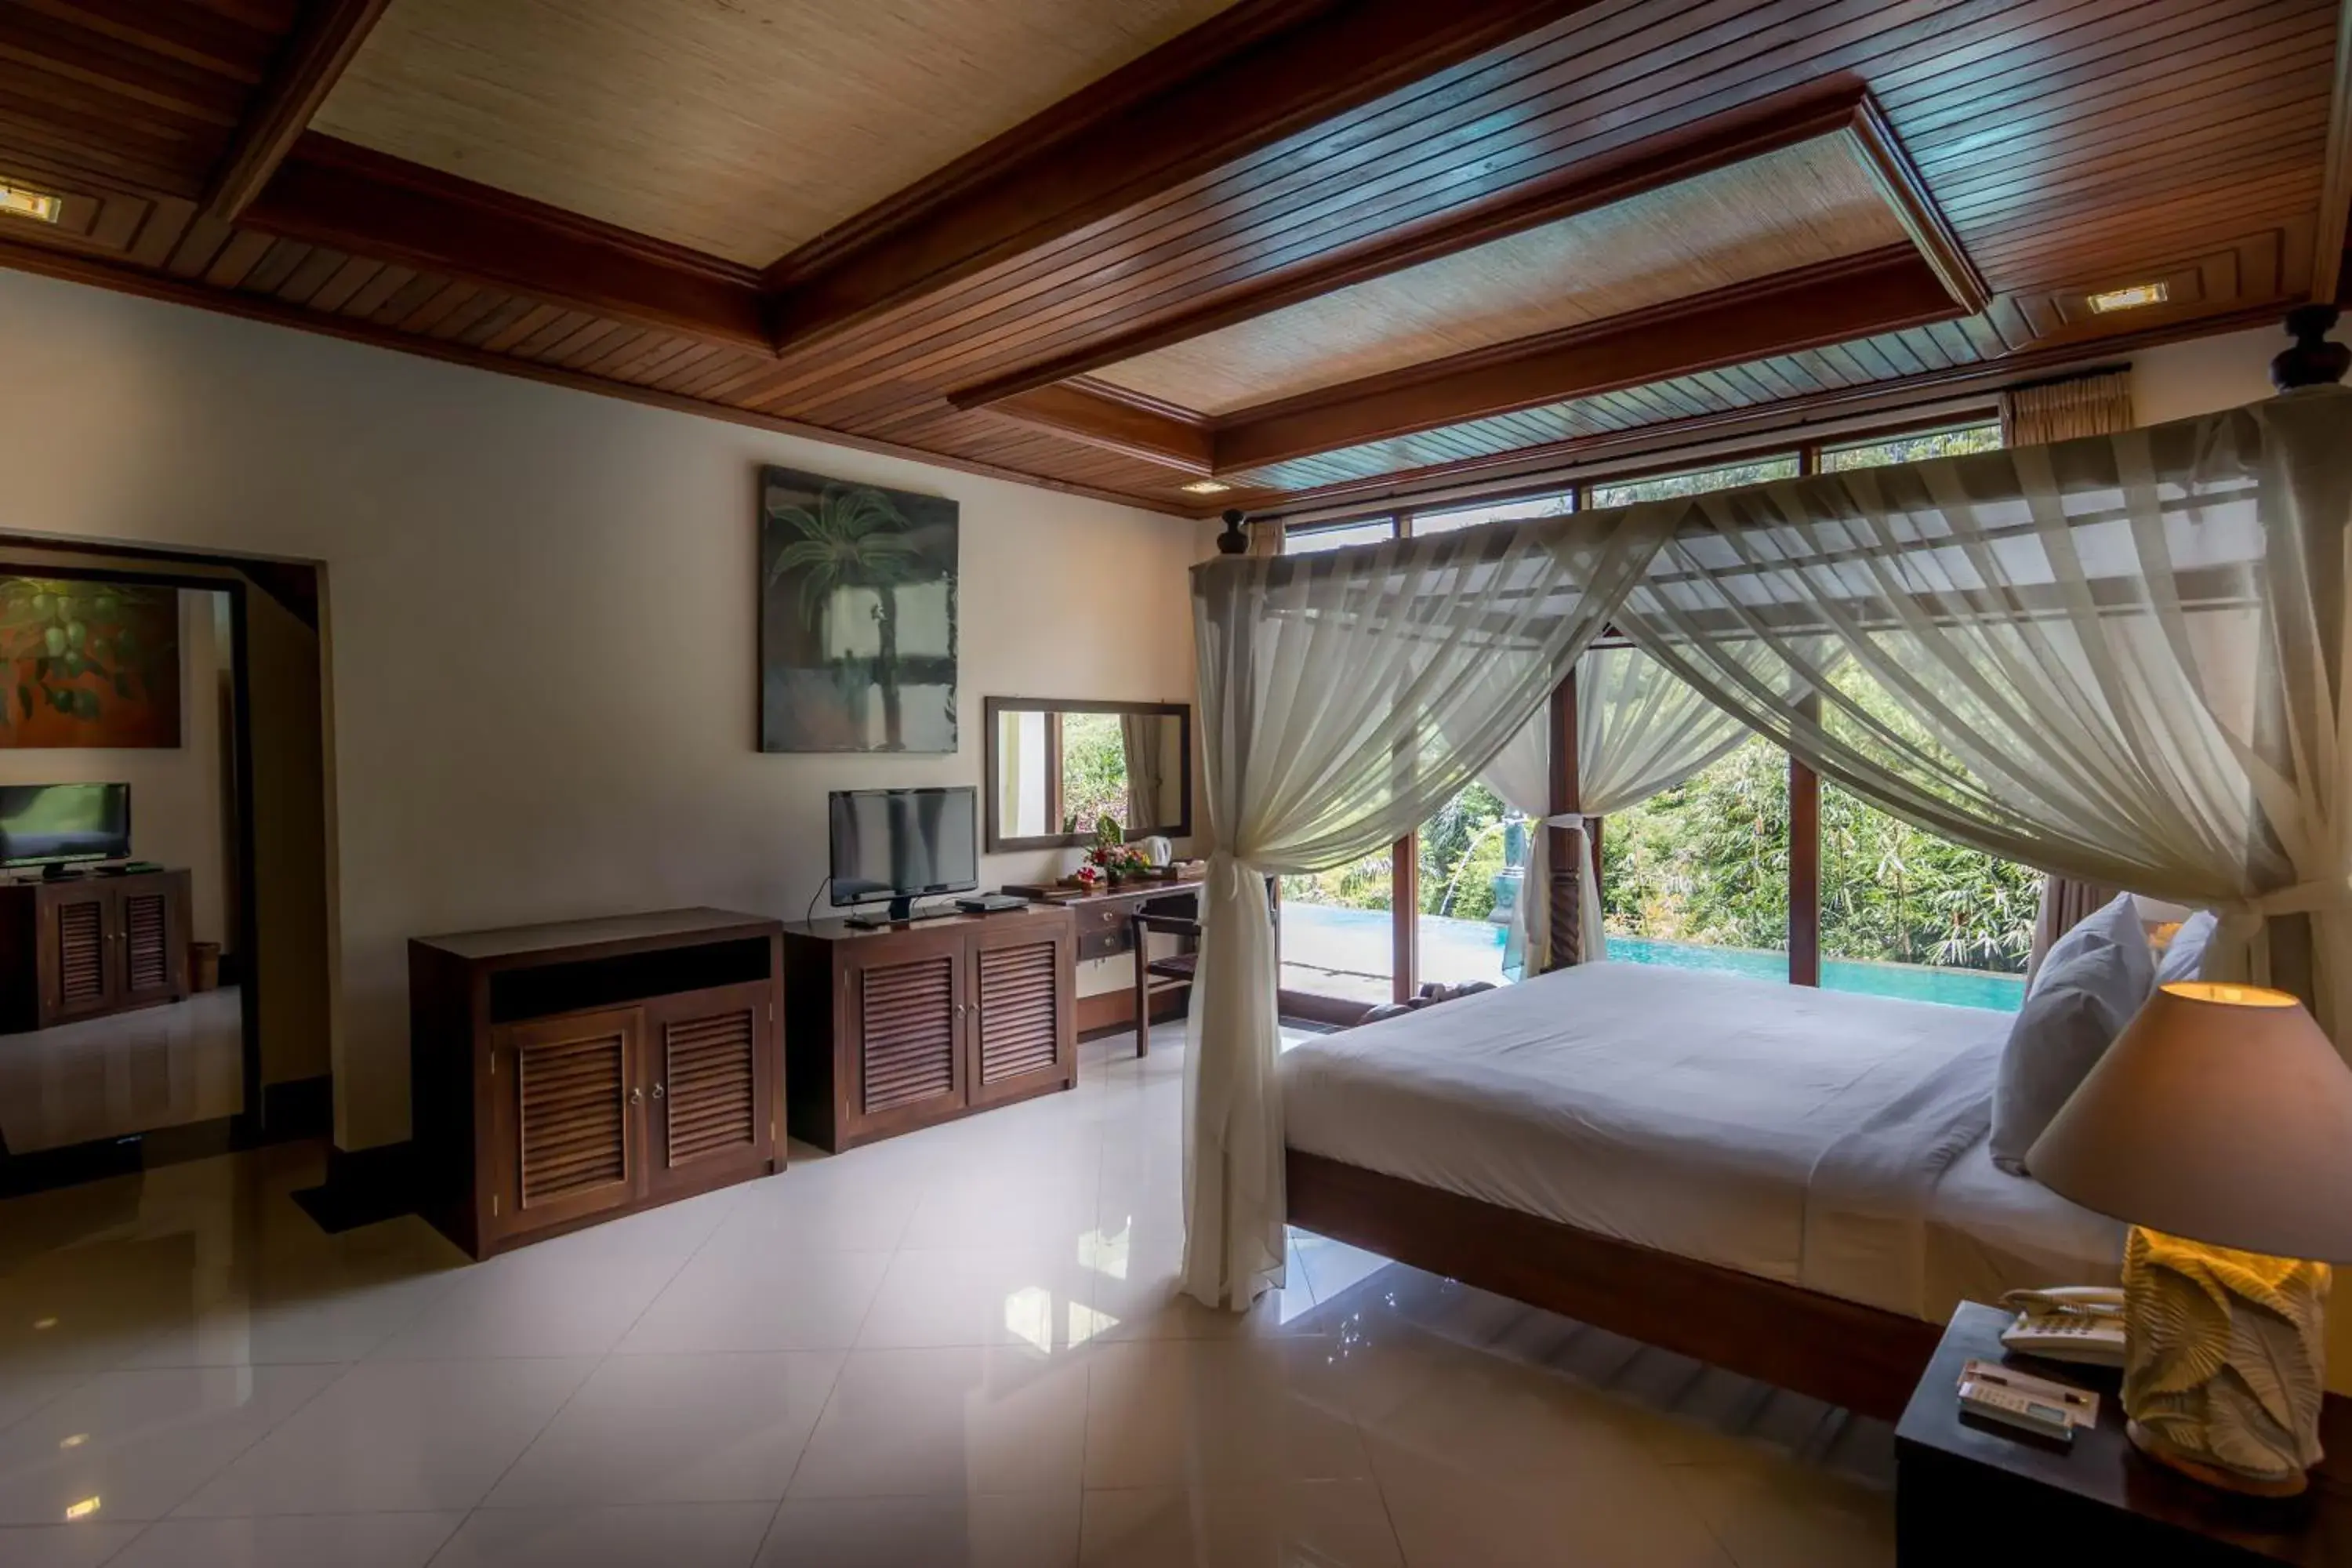 Bed, Room Photo in The Payogan Villa Resort and Spa